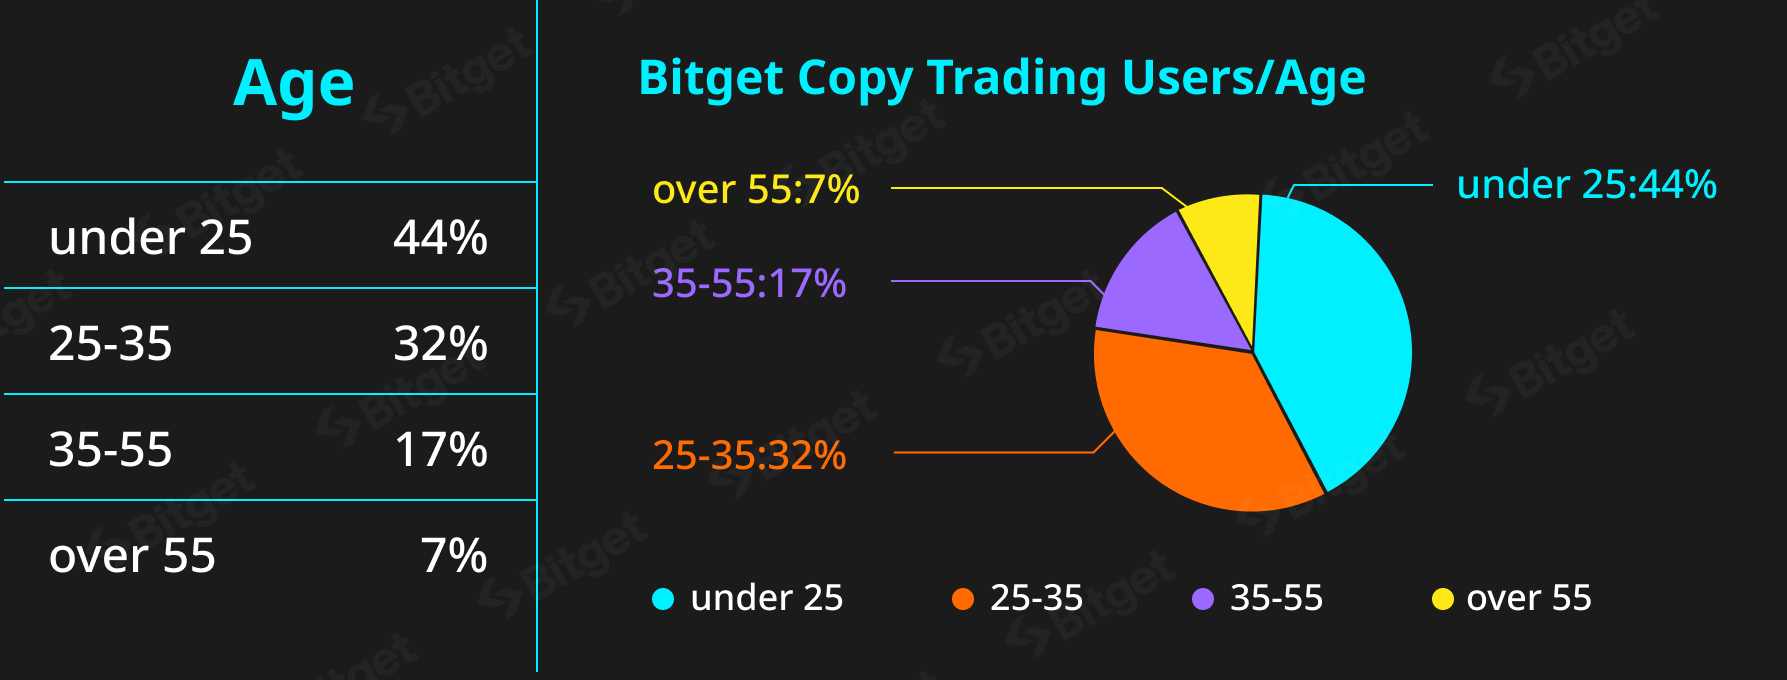 Nearly half of crypto copy traders are Gen Z, says Bitget report